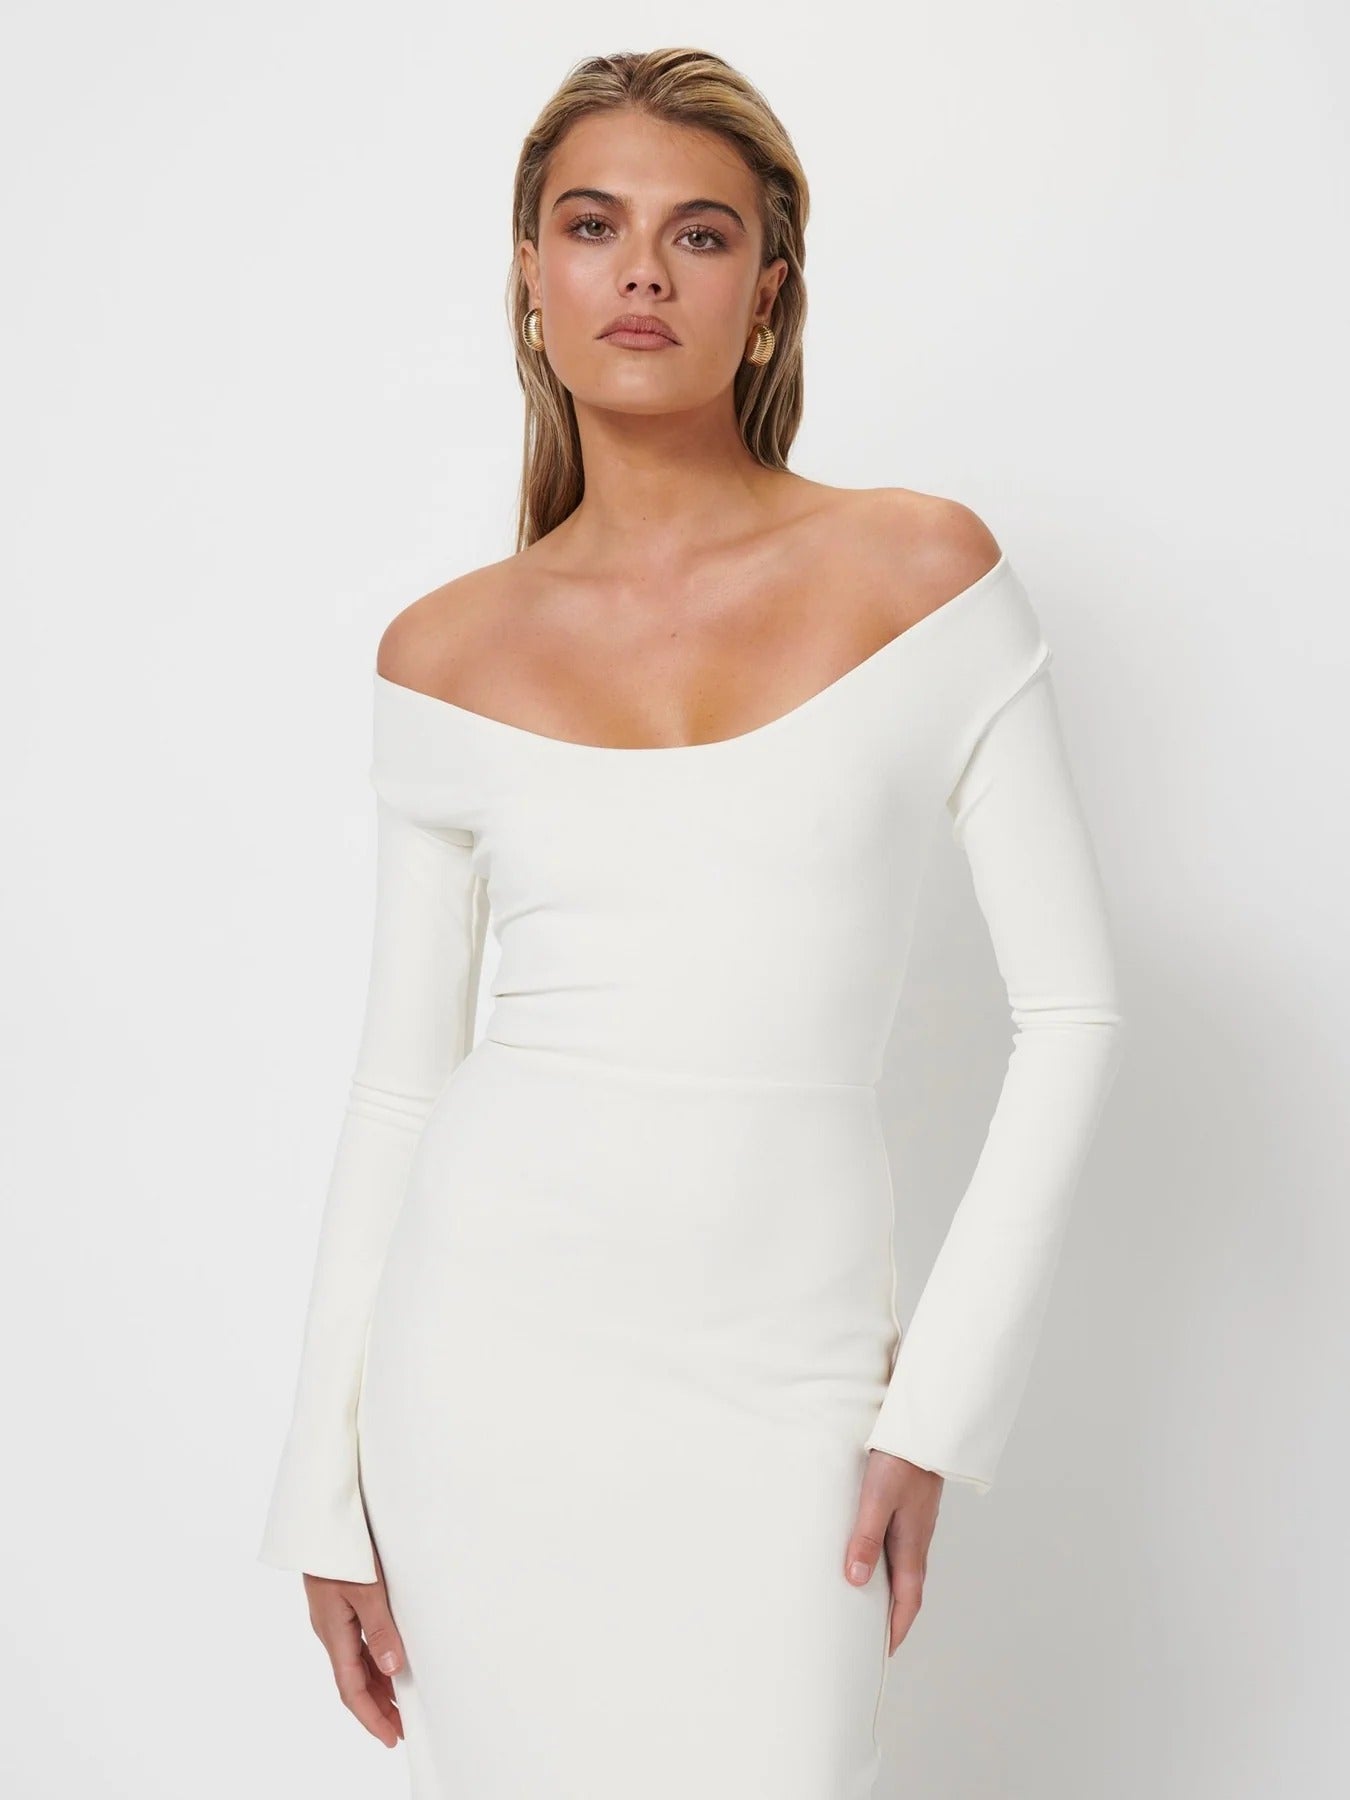 Vale Gown - Ivory - SHOPJAUS - JAUS